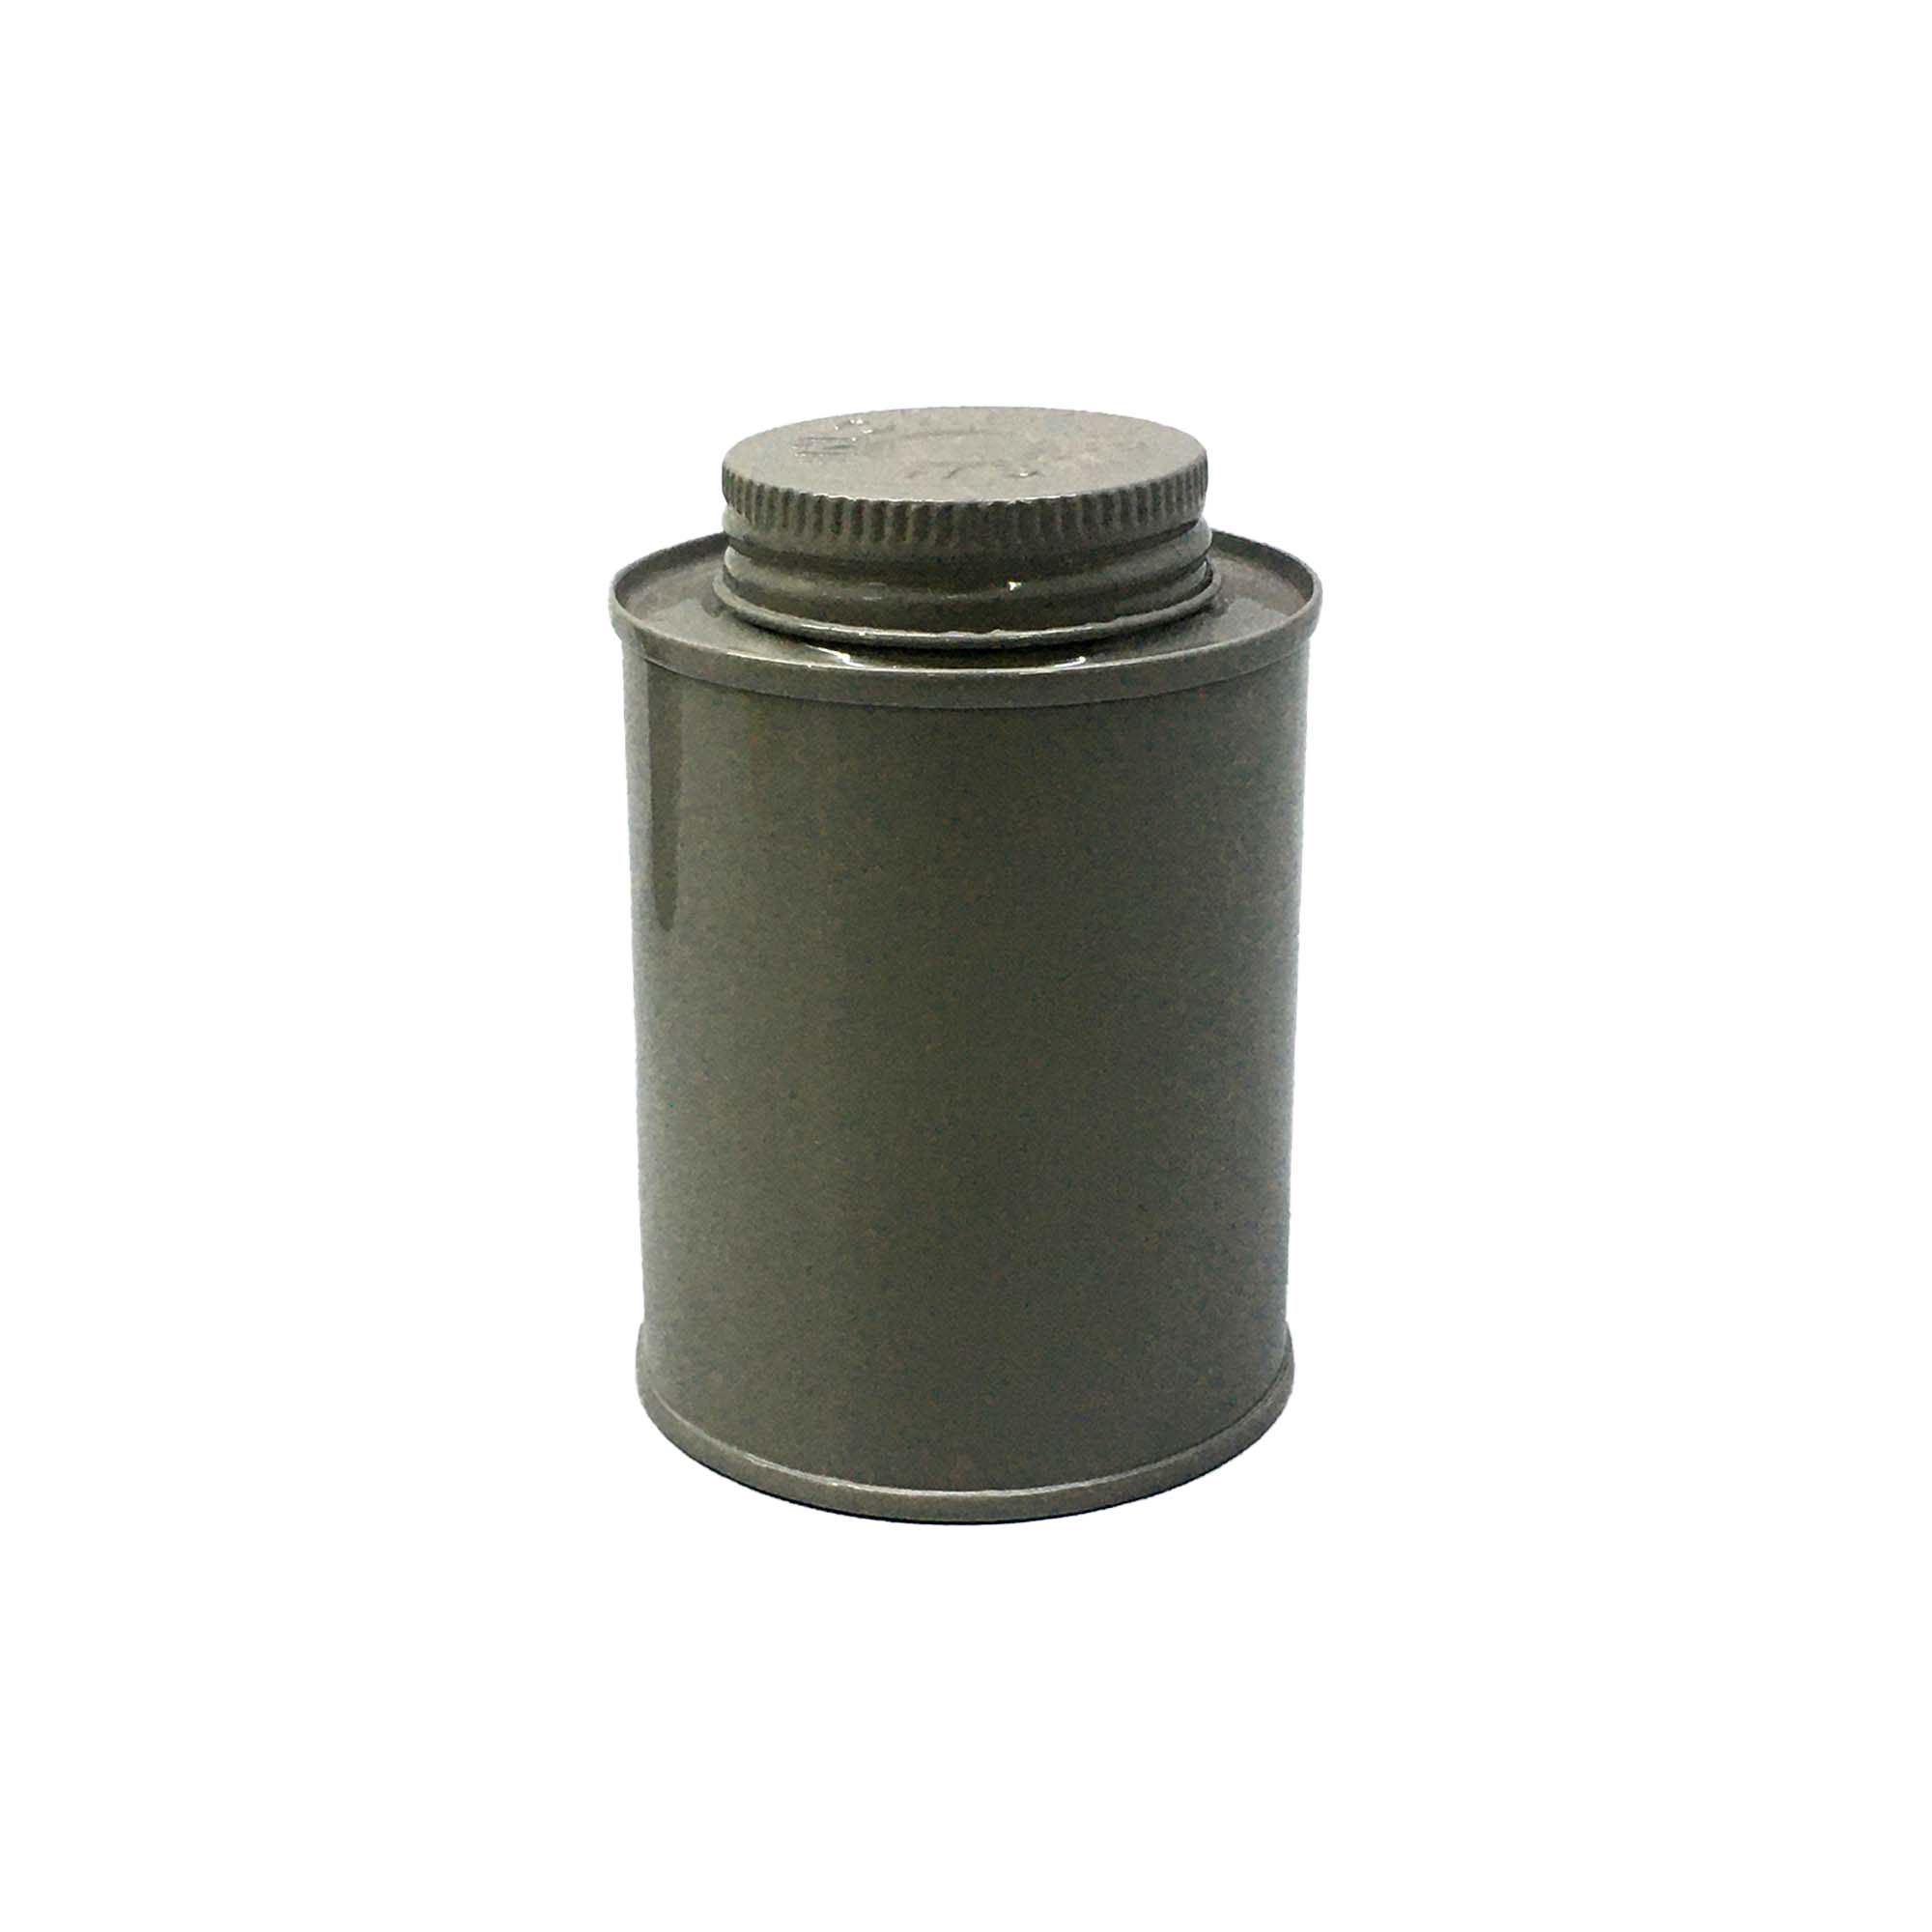 Vintage Spice Tin Canister Army Green 6x9.5cm